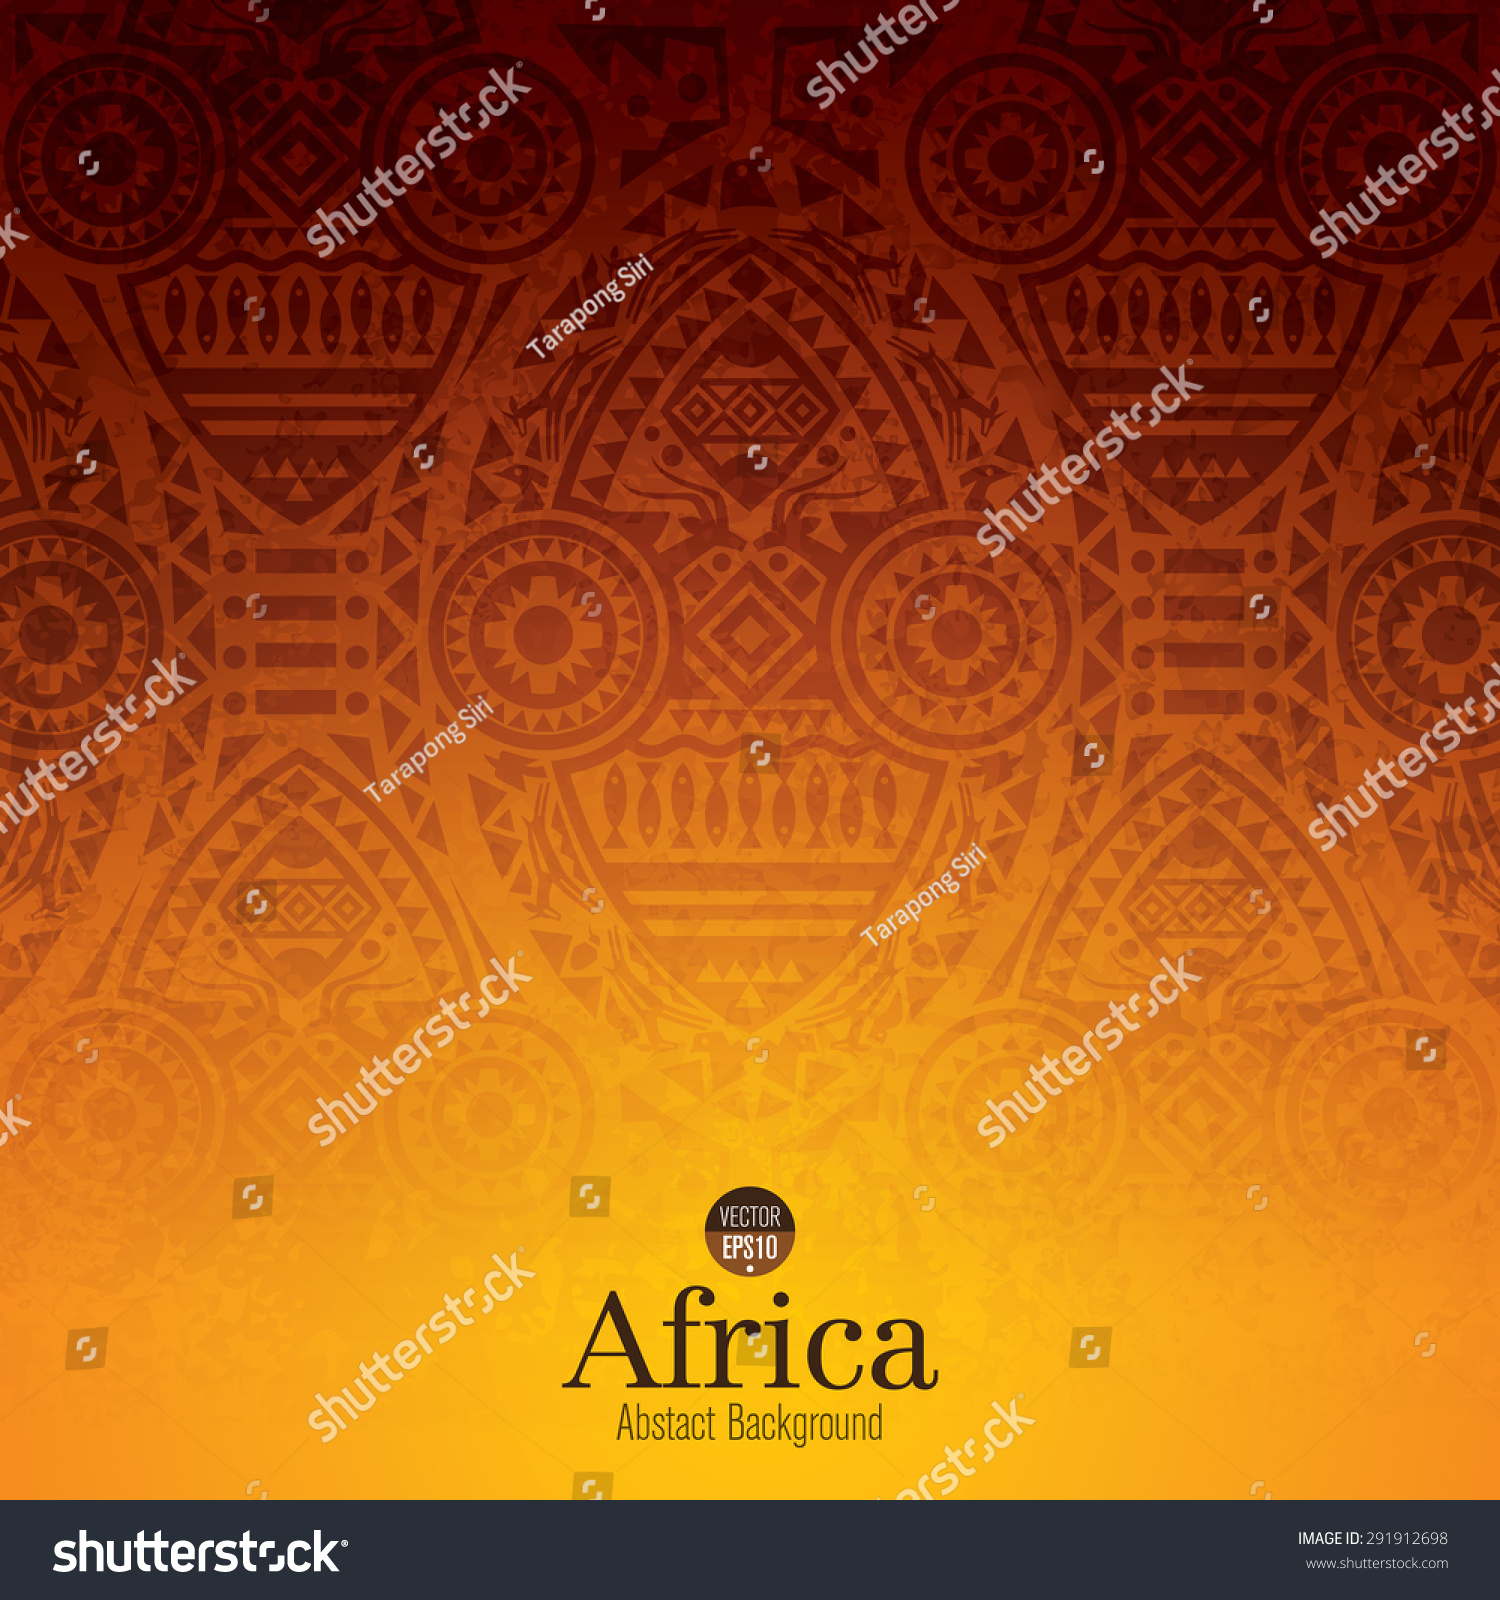 SVG of African art background design. Can be used in cover design, book design, website background, CD cover or advertising.  svg